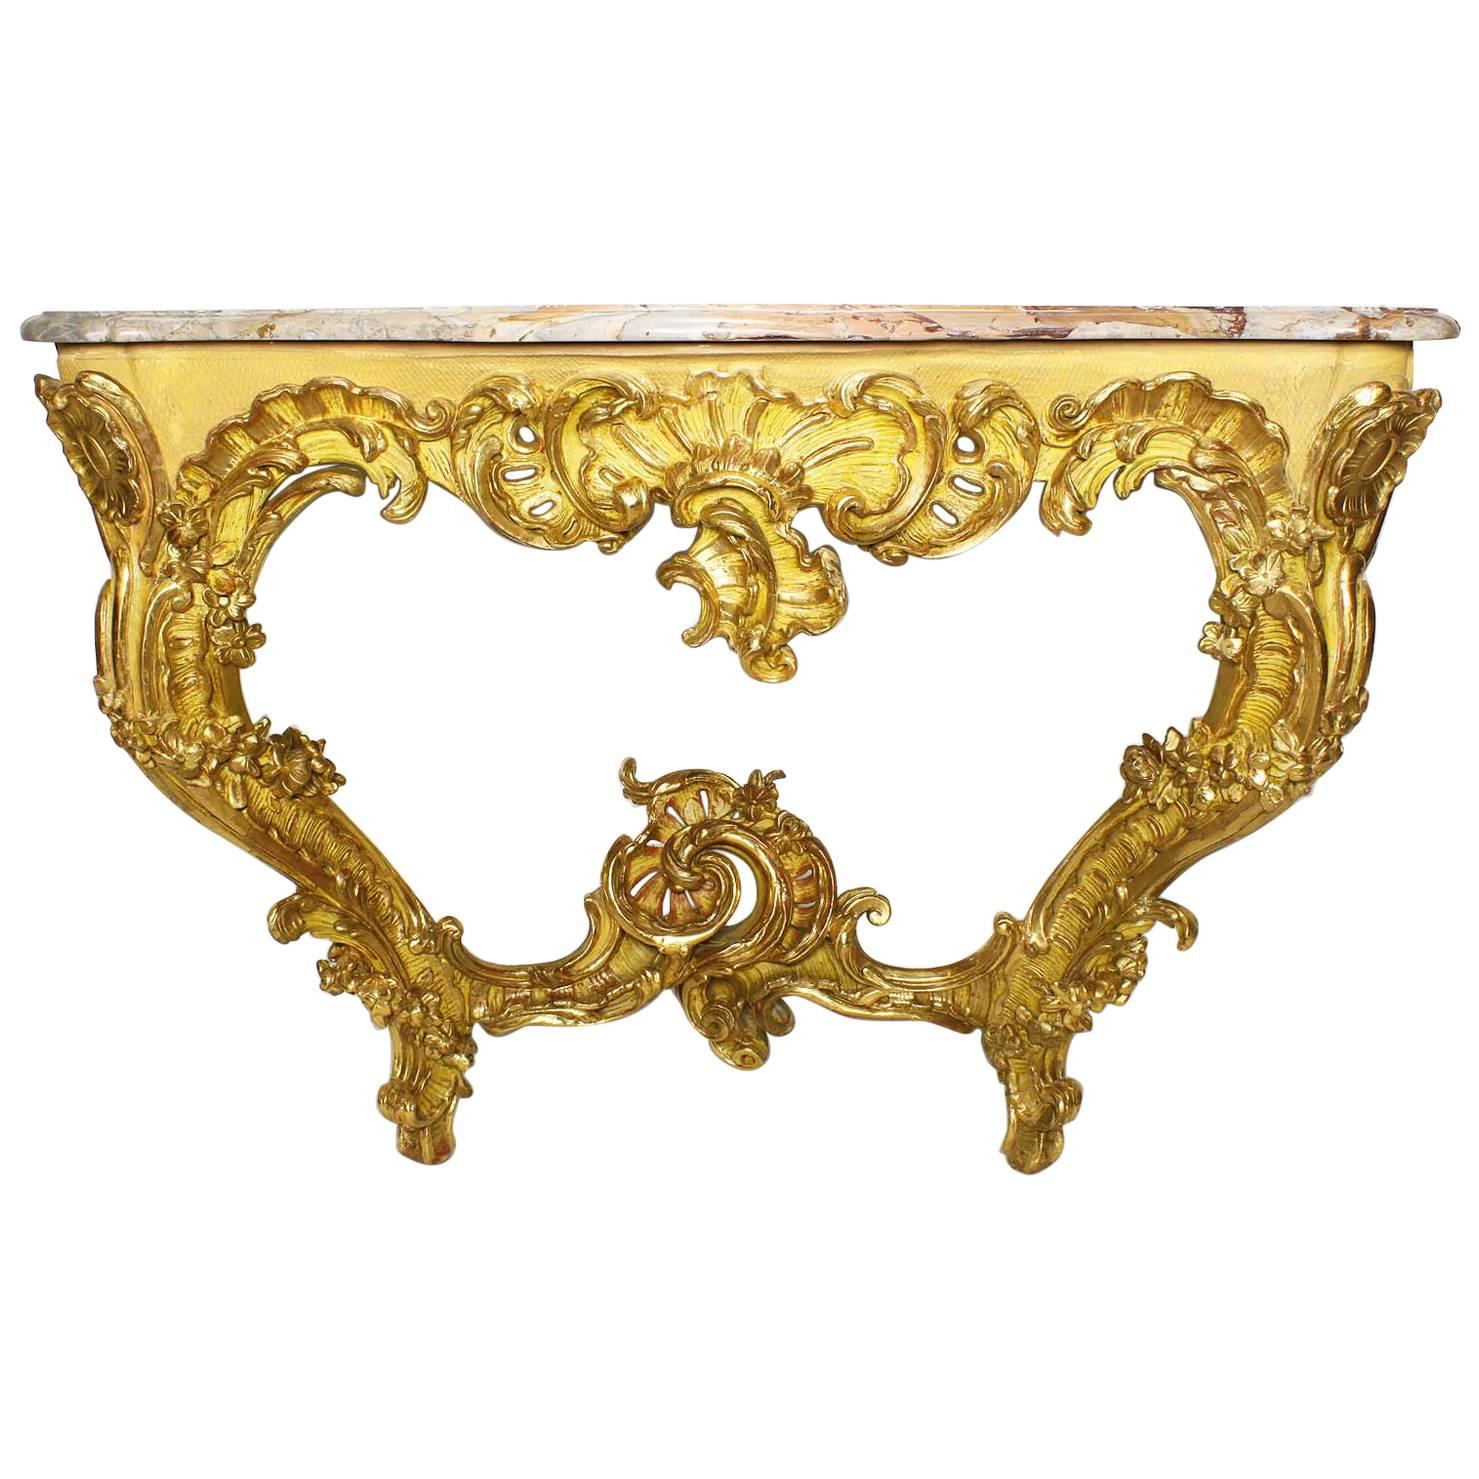 Fine French 19th Century Louis XV Style Rococo Giltwood Carved Console Table